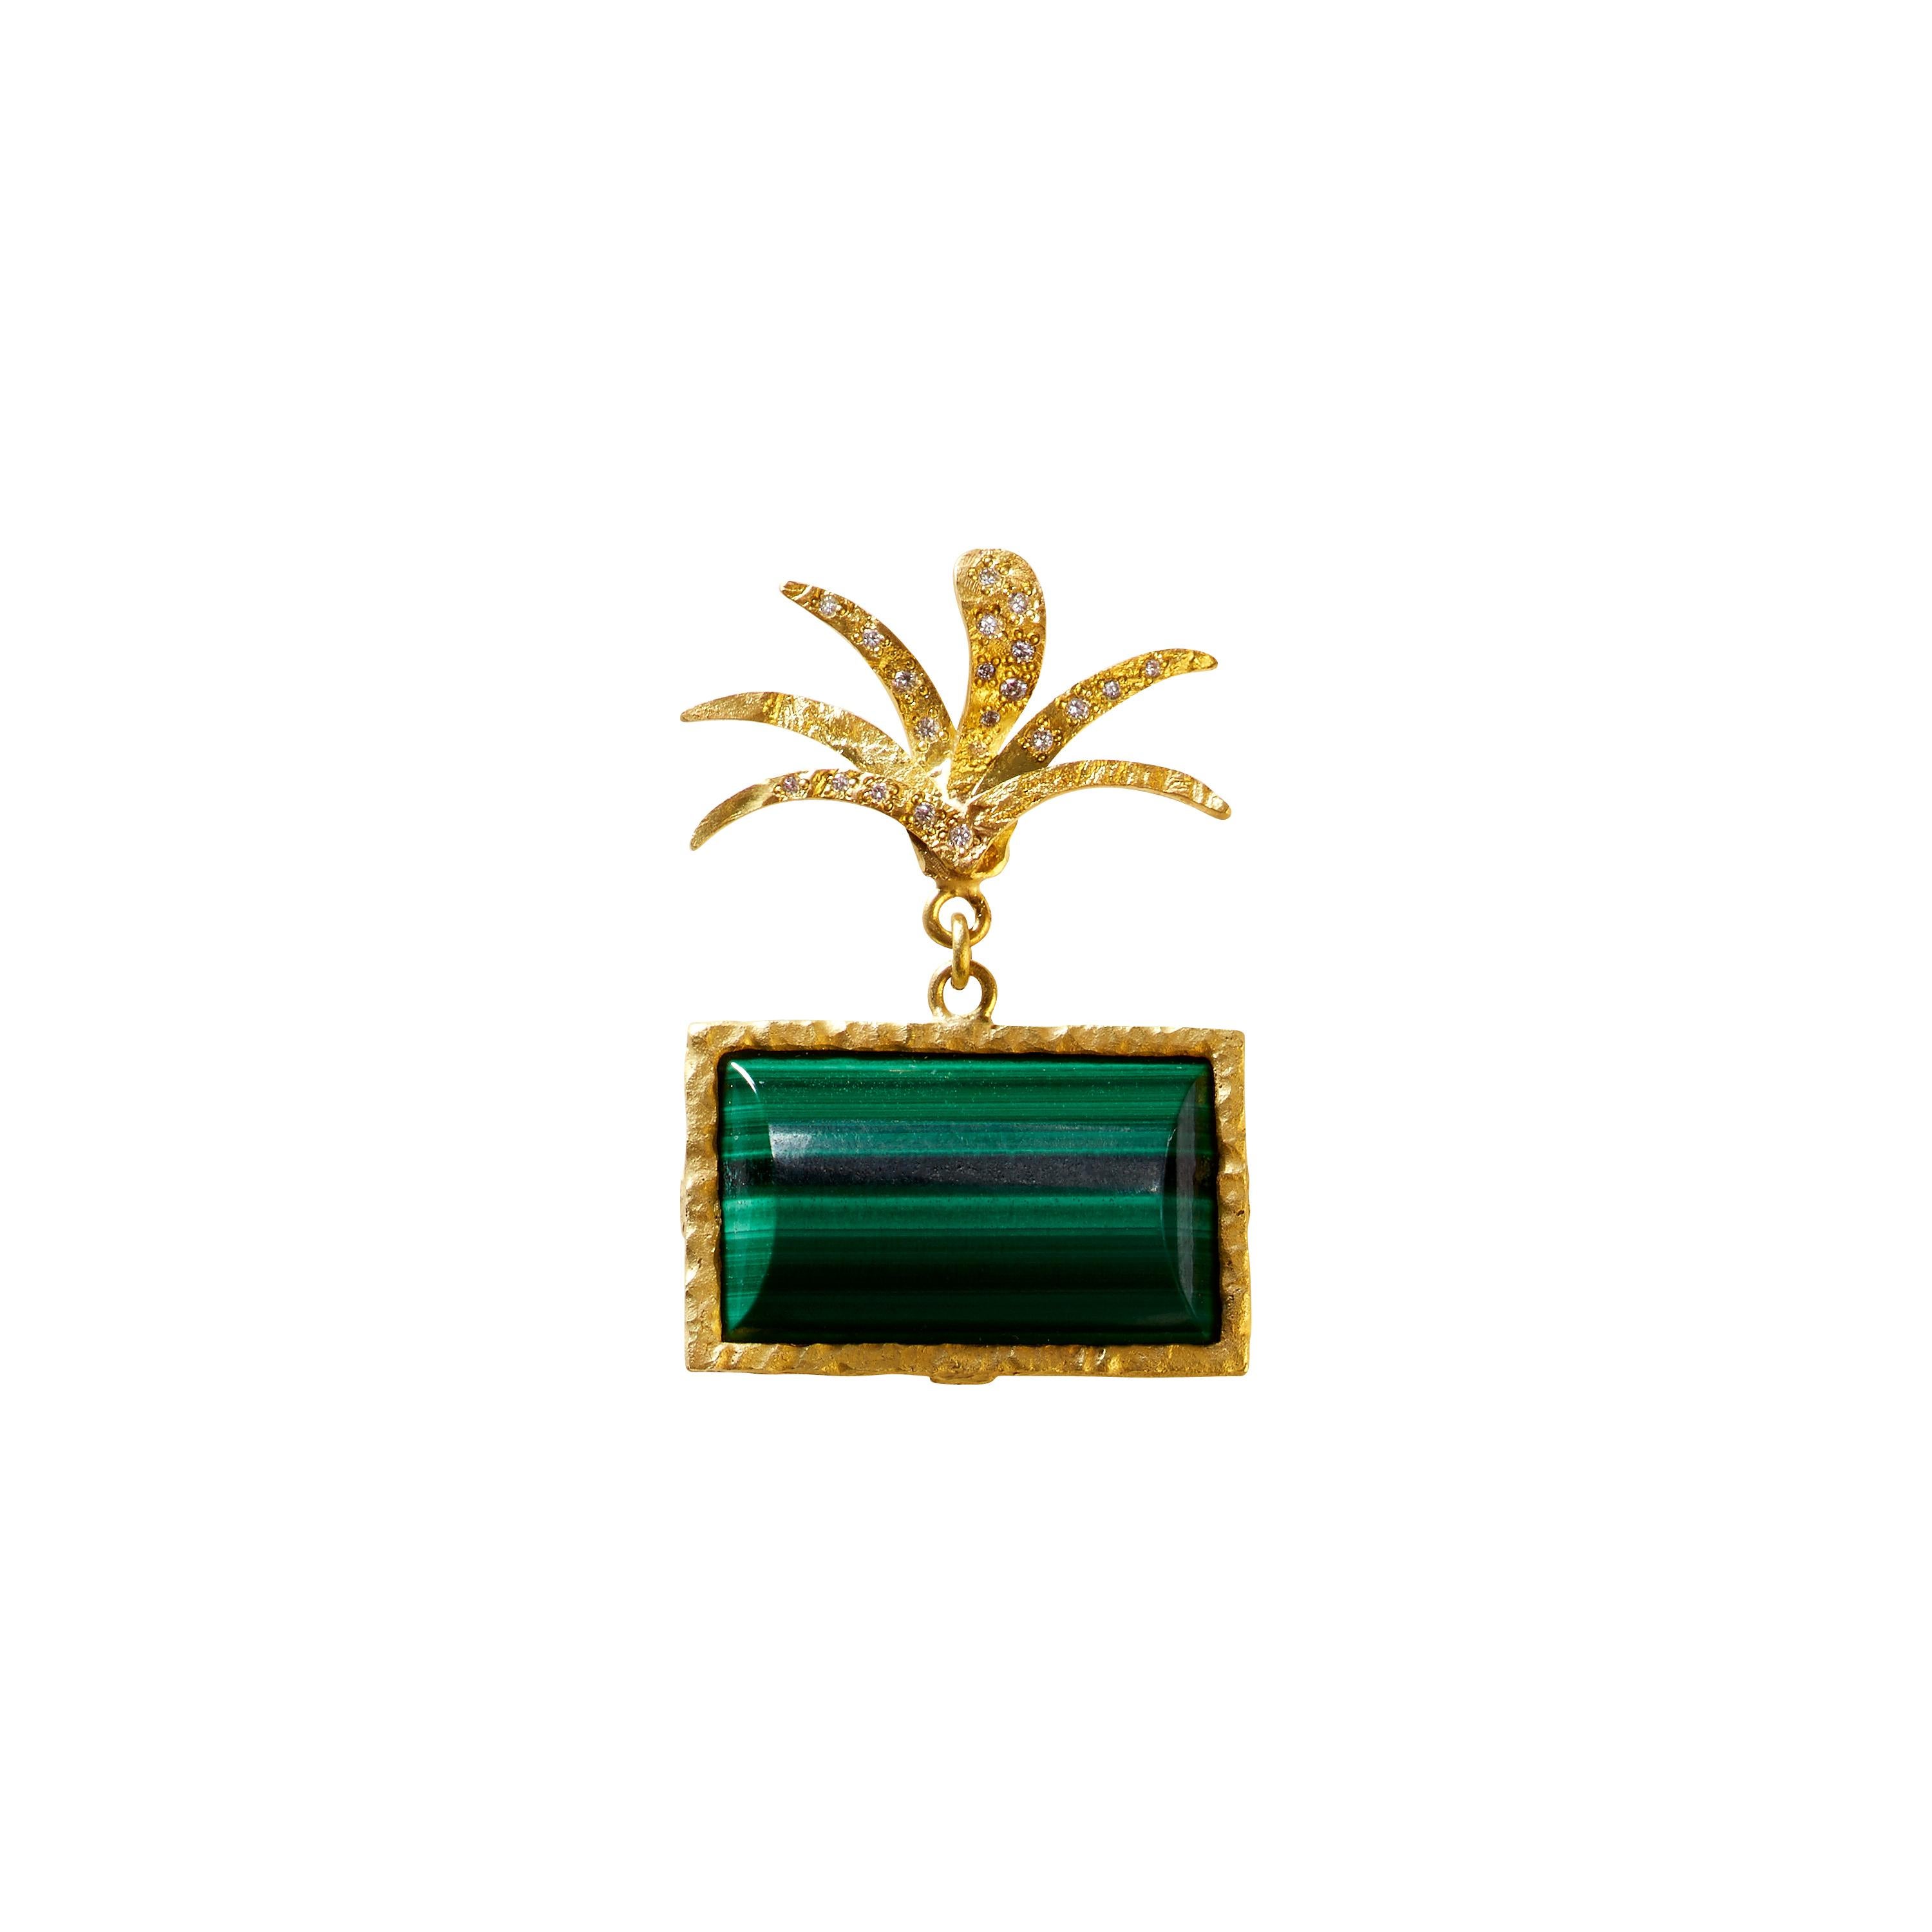 18k gold earring with 21 x Top Wesselton VVS Diamonds and a green Malachite stone. The Green Palm Earring is from the ROXY GIRL collection. It is beautiful on its own, and combined with other ELHANATI earrings. Each piece is unique and handmade upon